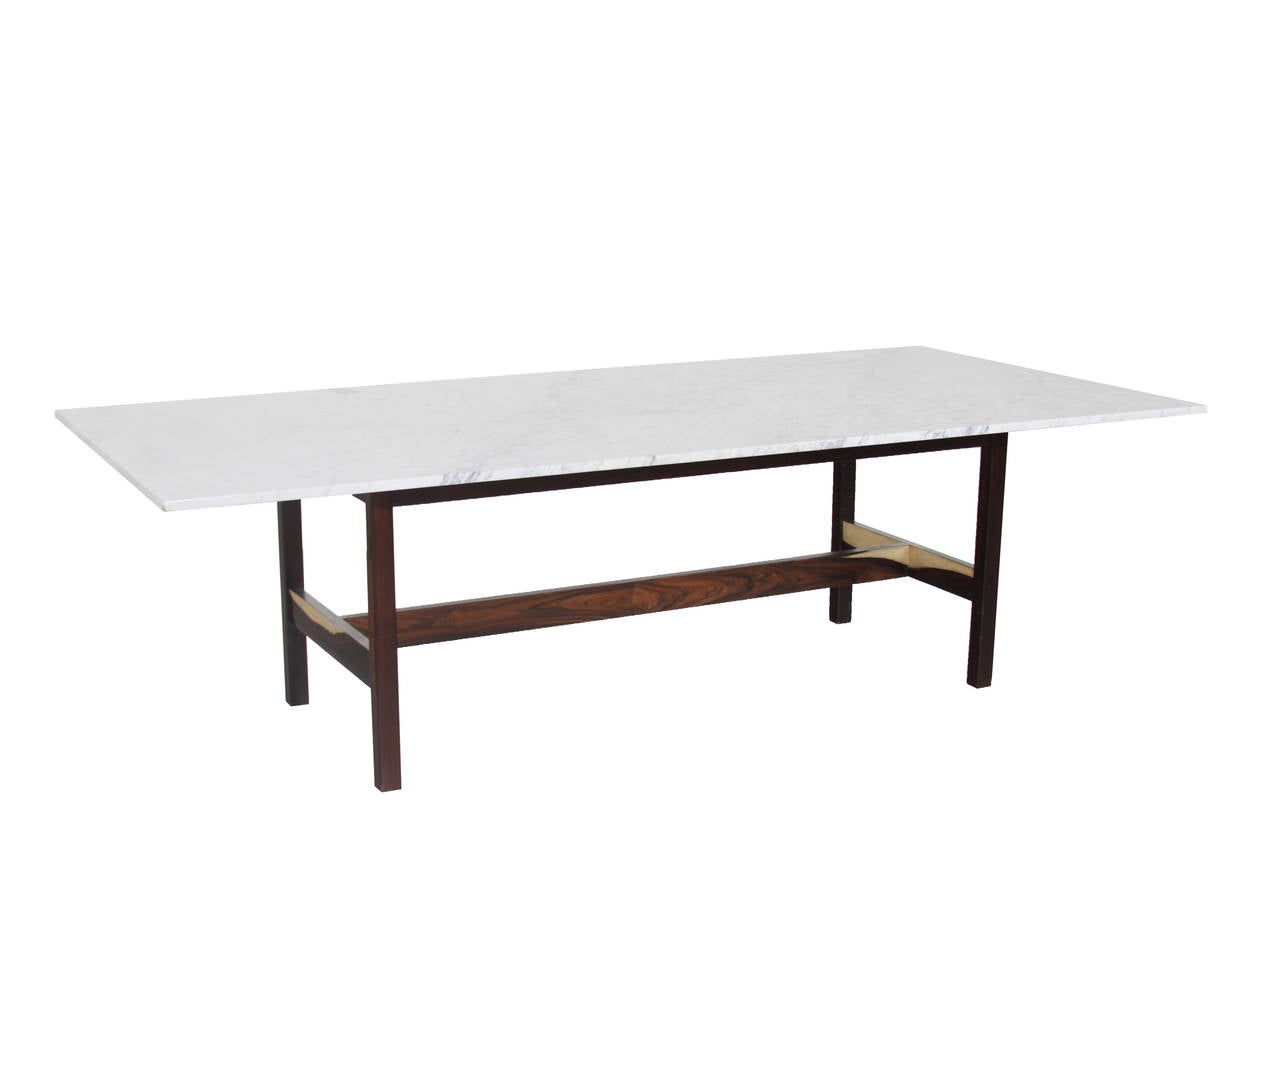 A simple and elegant vintage Brazilian Rosewood dining table with Carrara Marble Top.

Many pieces are stored in our warehouse, so please click on CONTACT DEALER under our logo below to find out if the pieces you are interested in seeing are on